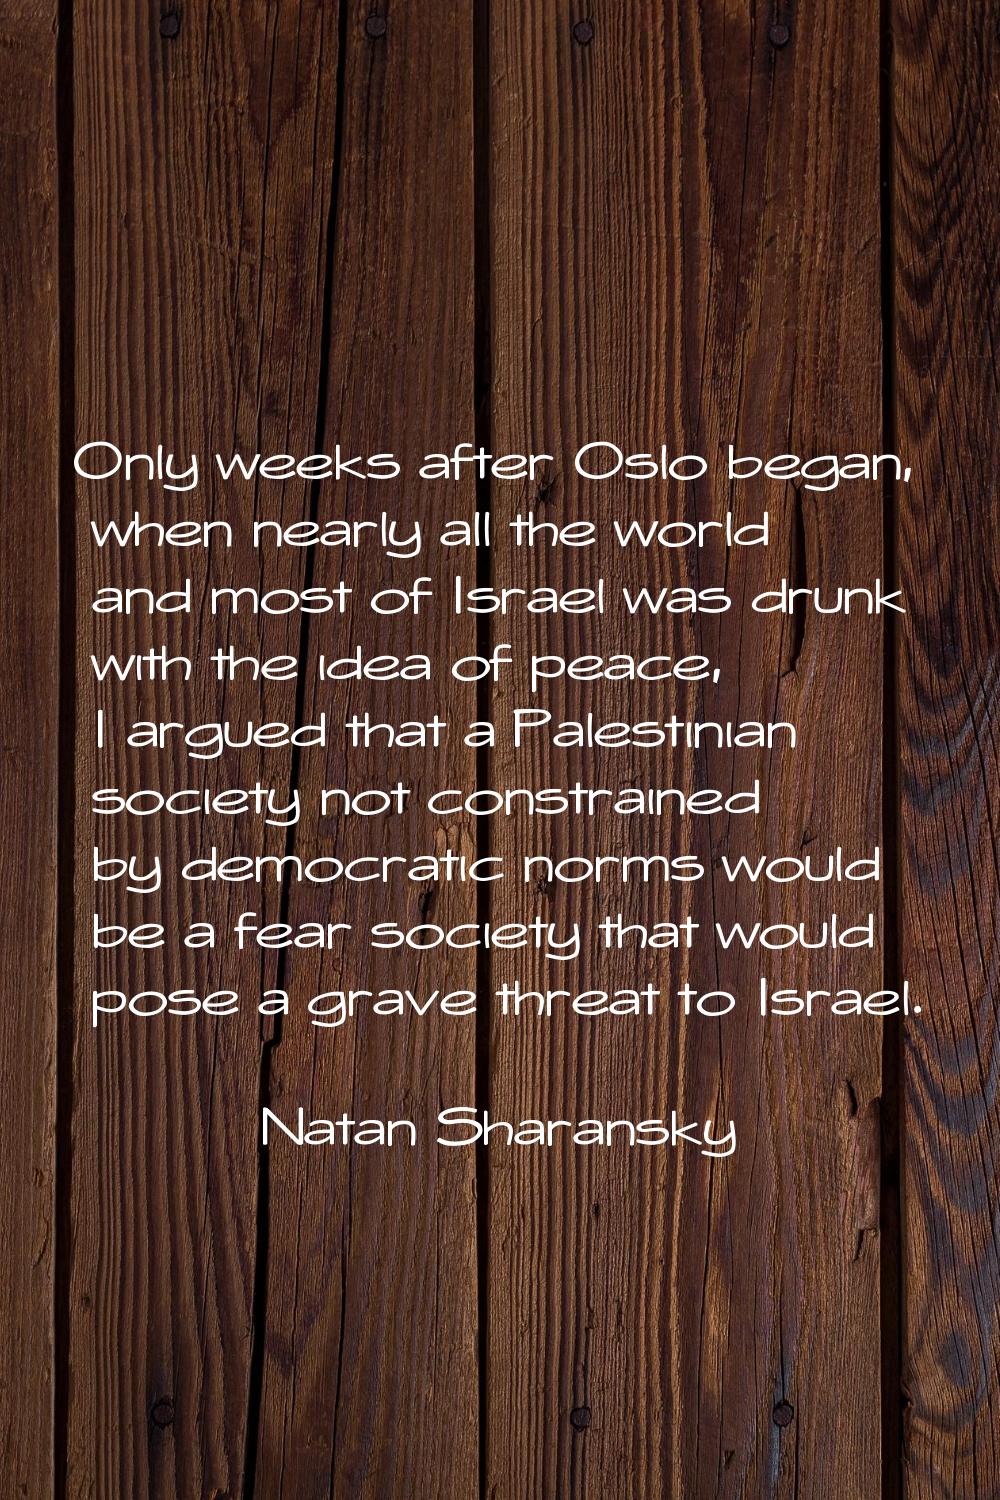 Only weeks after Oslo began, when nearly all the world and most of Israel was drunk with the idea o